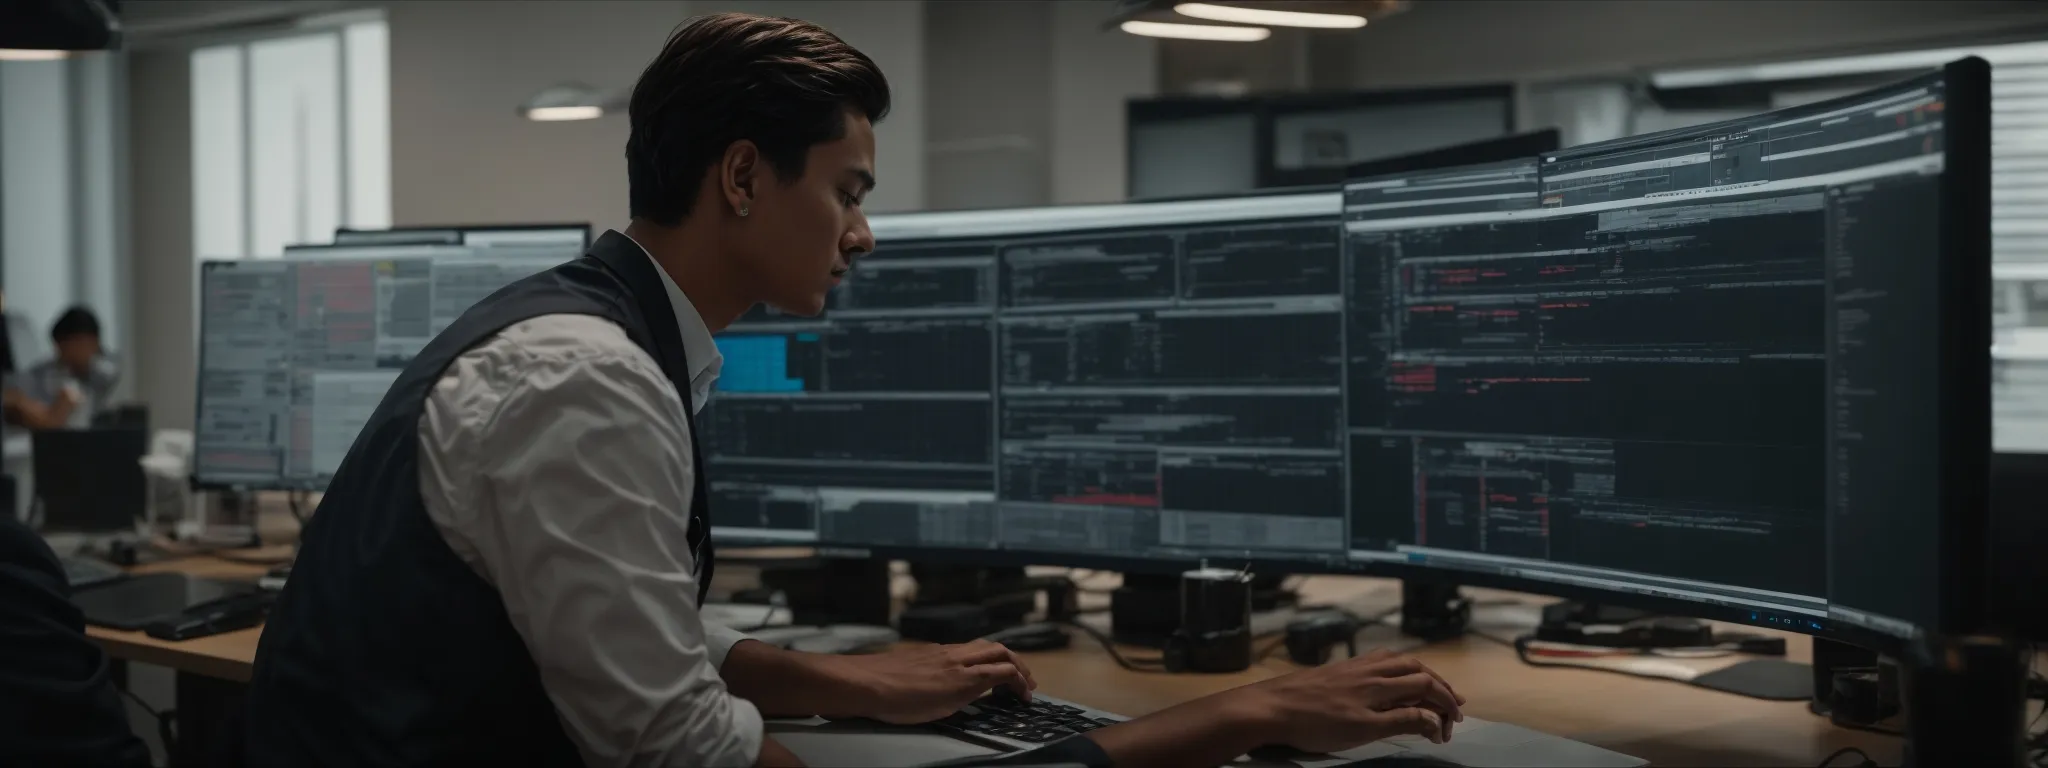 a determined professional clicks through a sleek project management interface on a modern computer in a well-lit office.